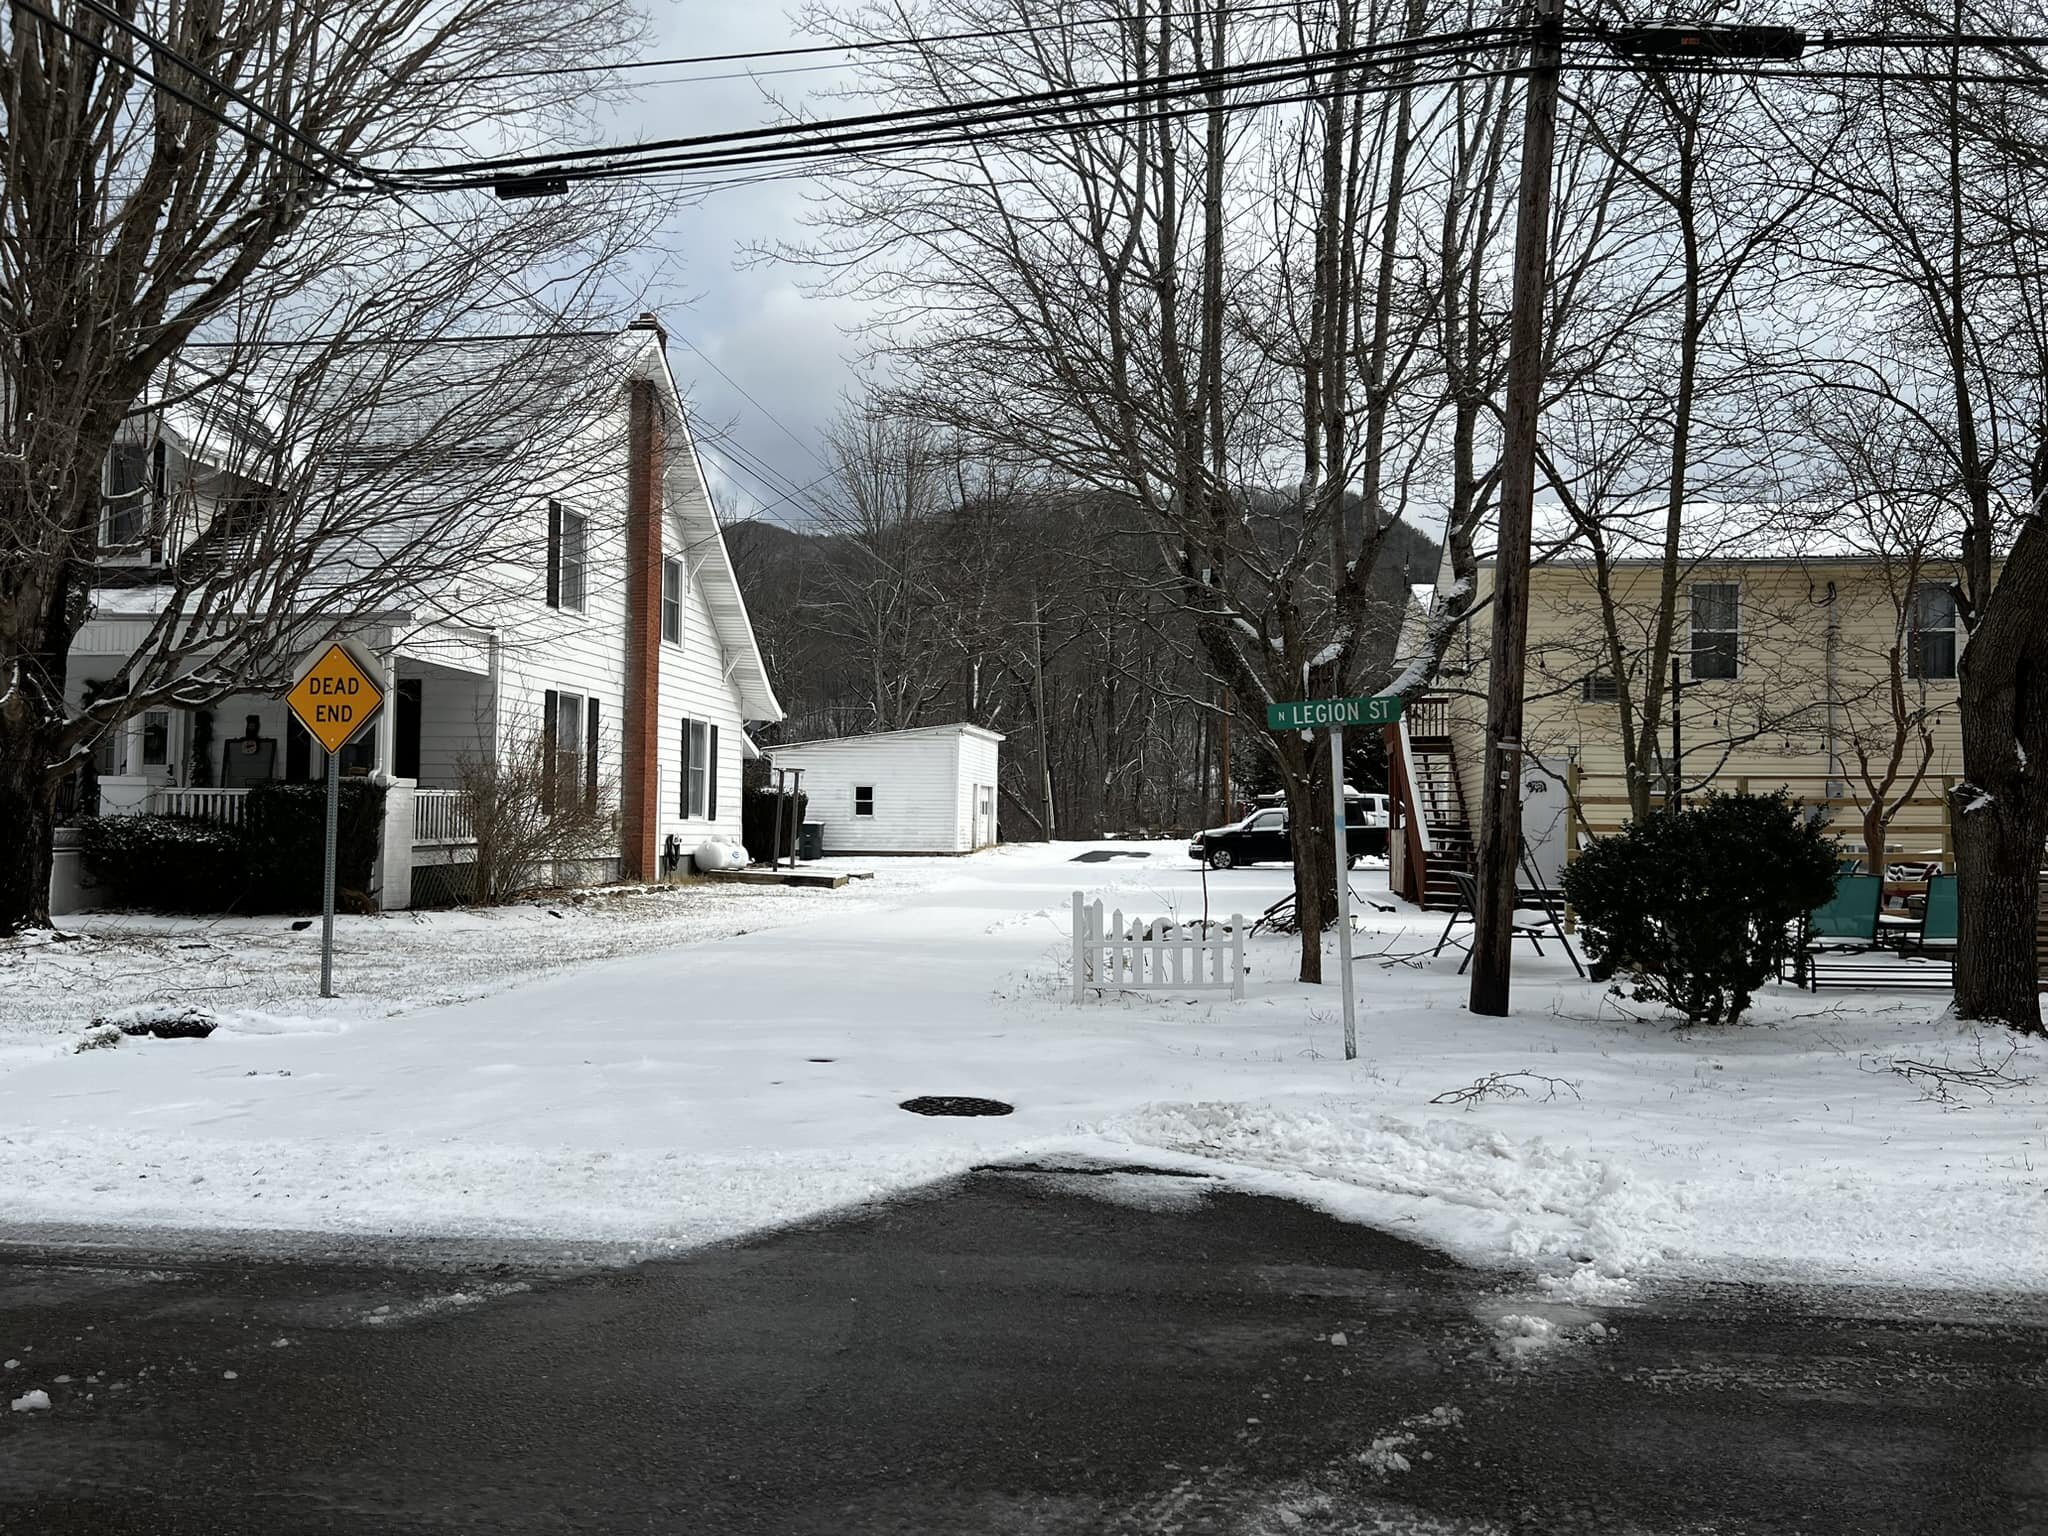 Town of Damascus, Virginia
Dead End streets need plowed too! Only access for five driveways - four homes and one business.